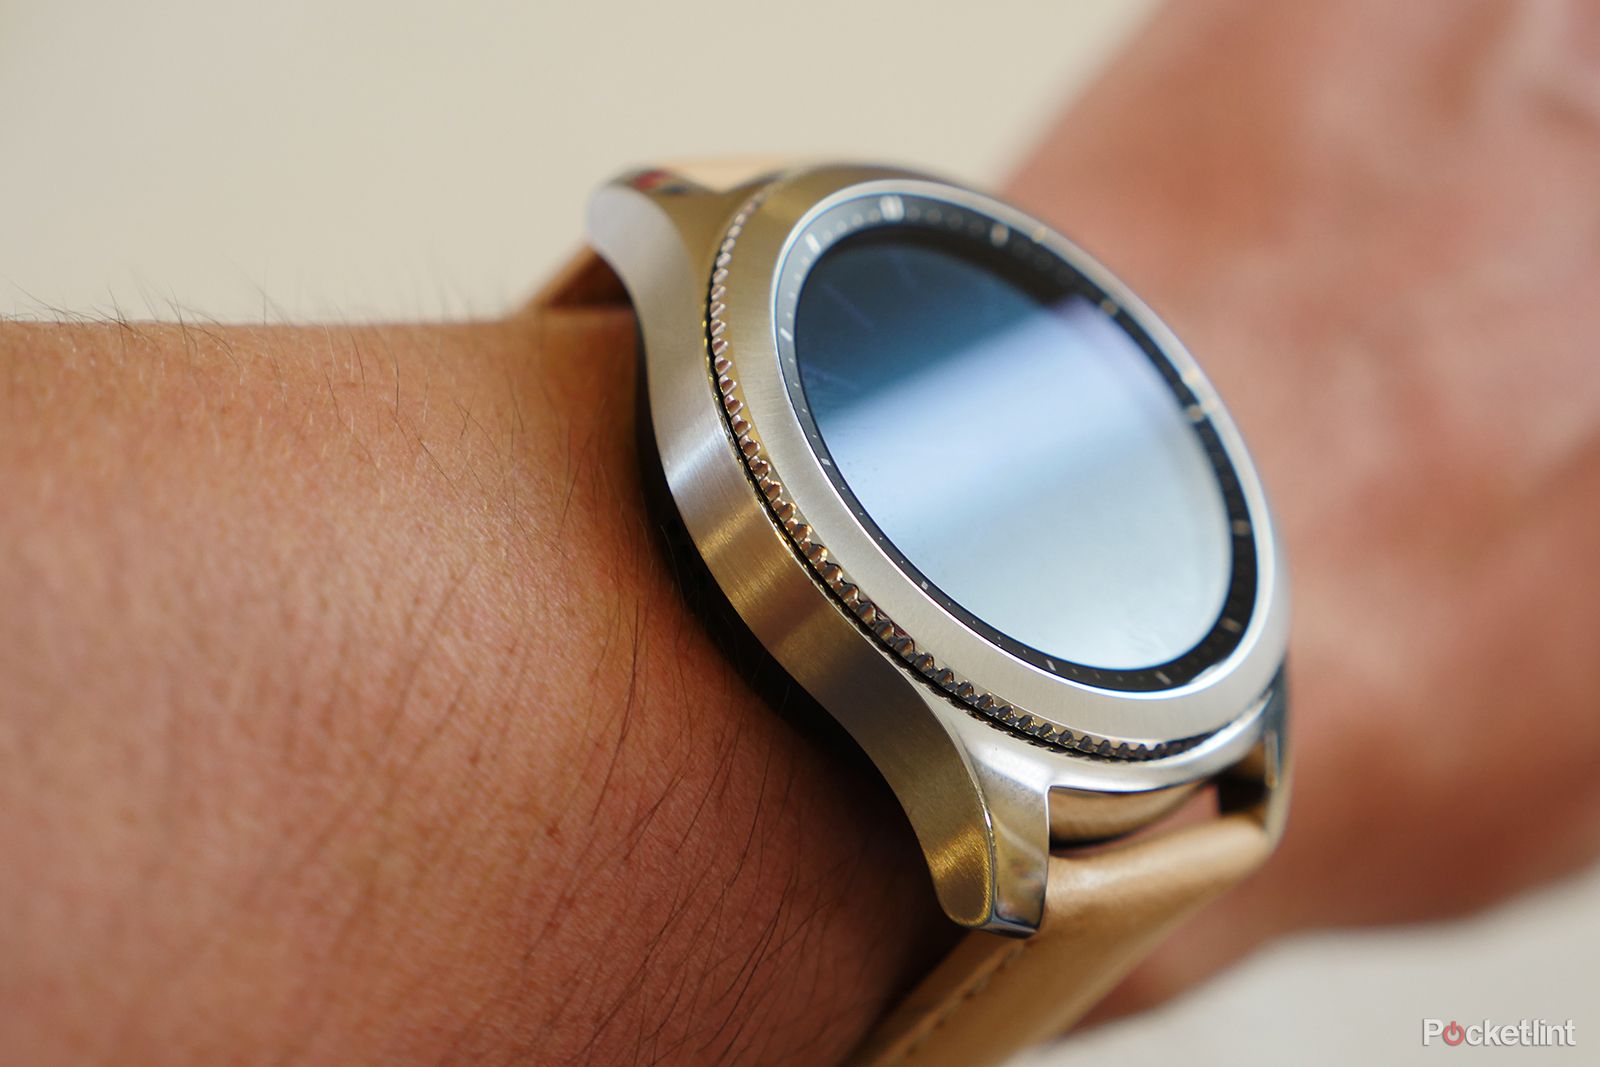 samsung gear s3 review image 4